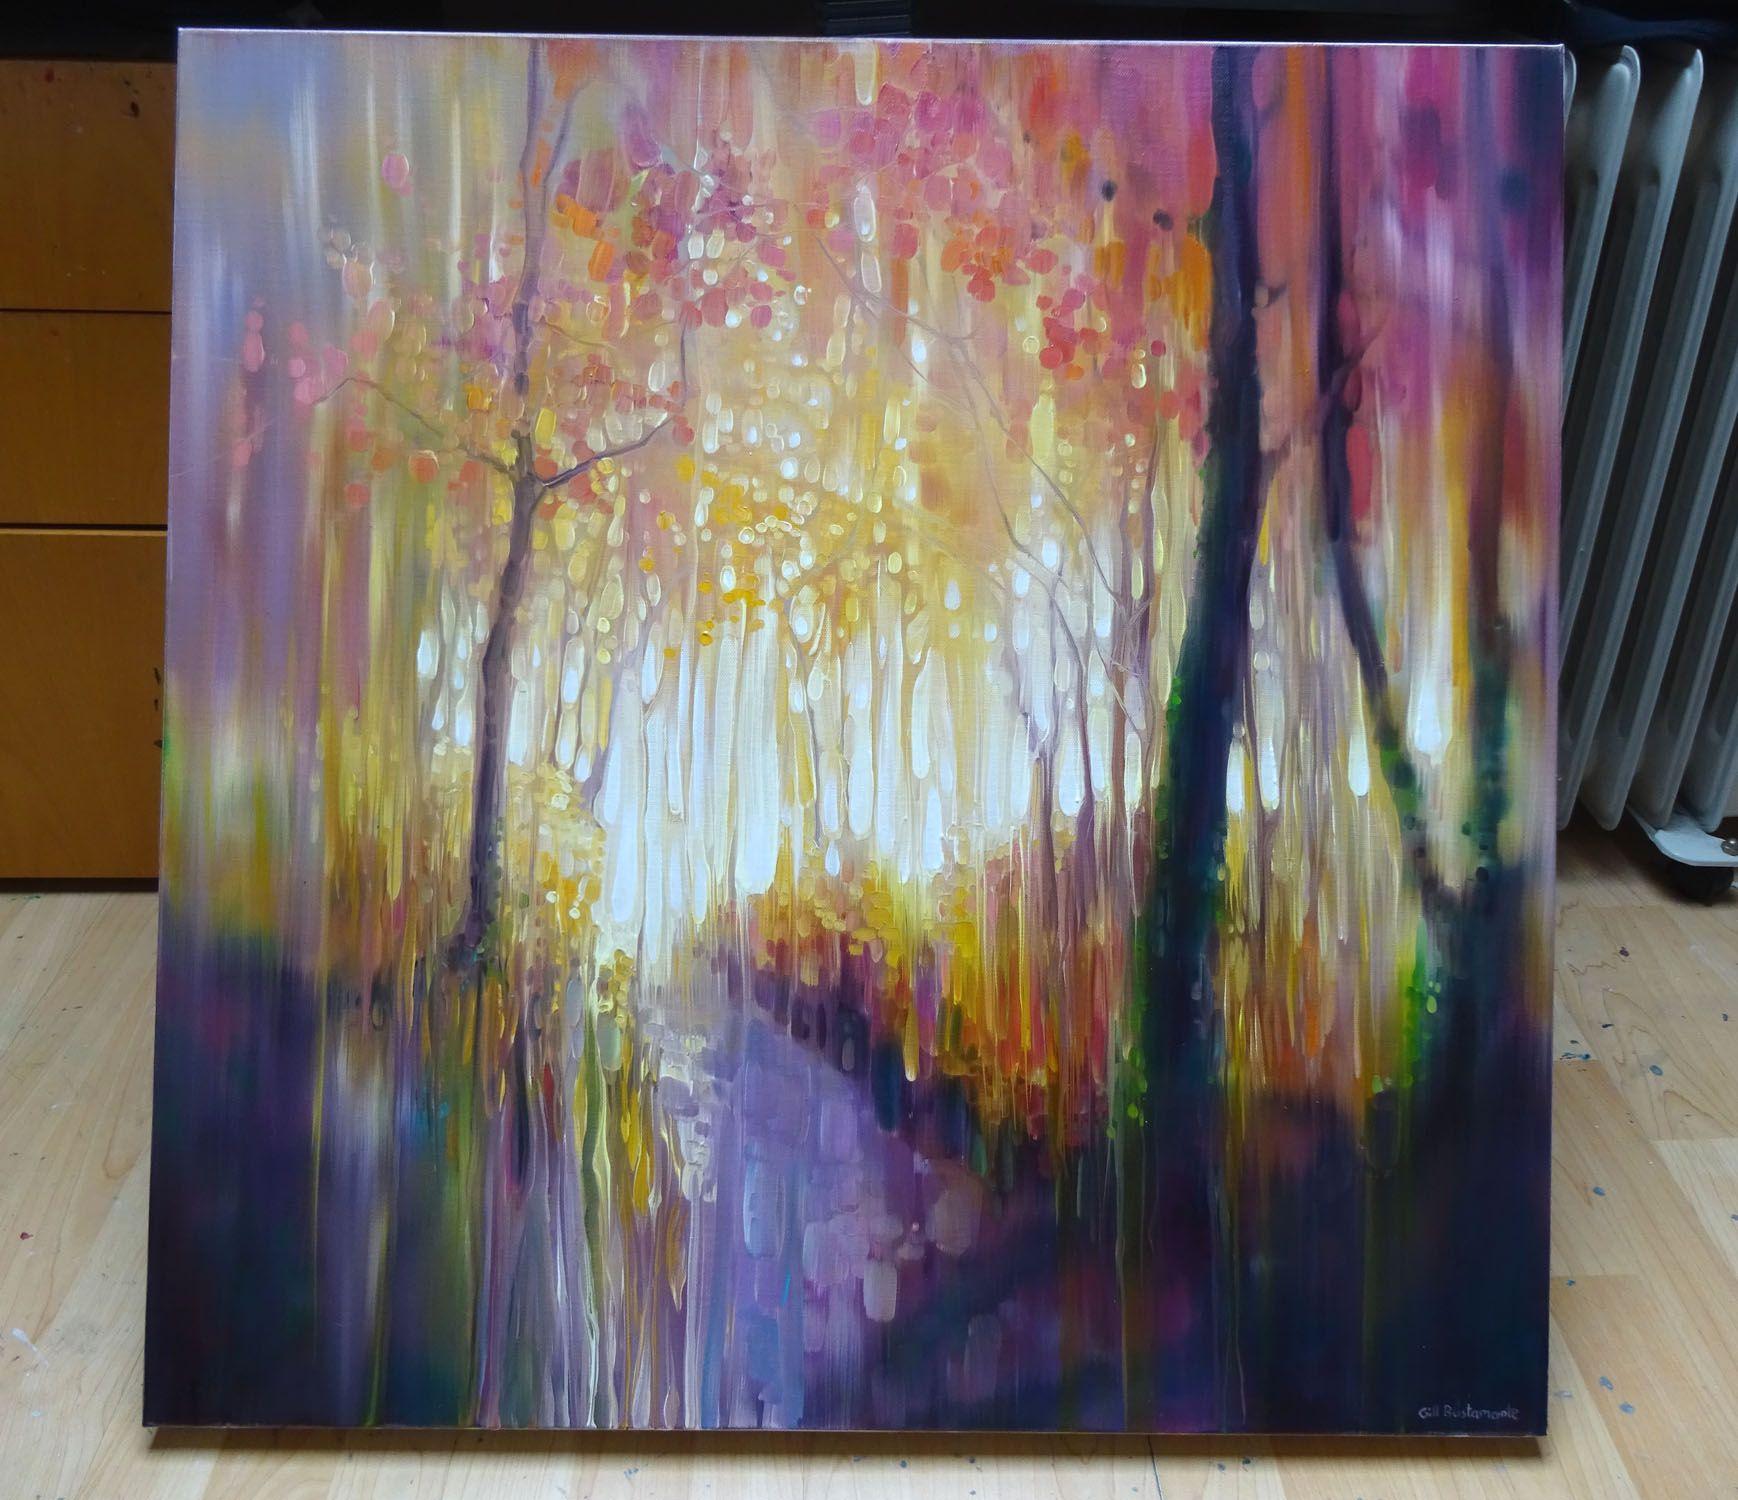 October Glows, Painting, Oil on Canvas 2